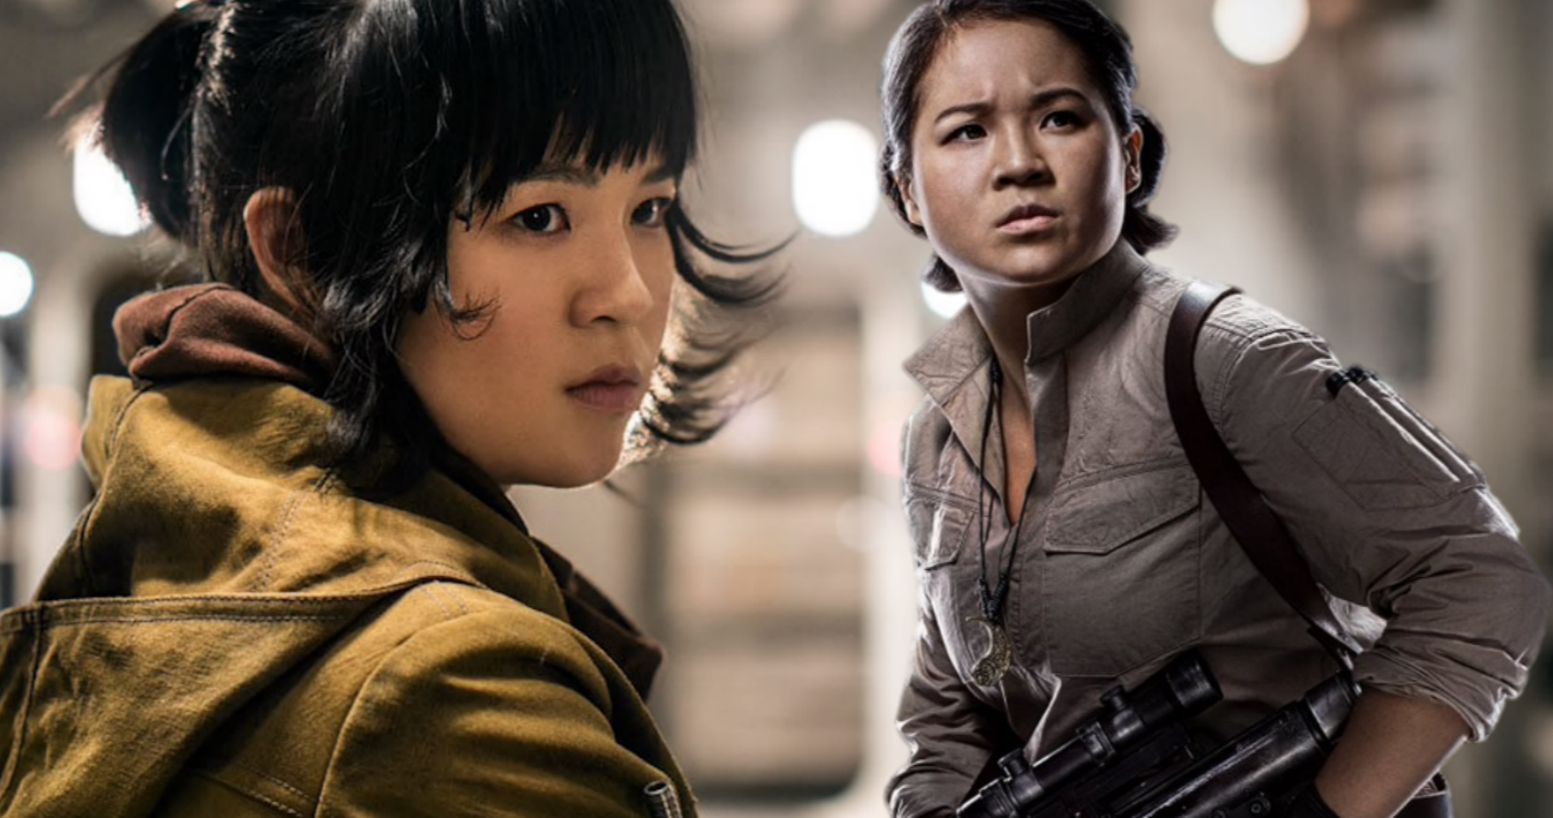 The Last Jedi Harassment Landed Kelly Marie Tran in Therapy